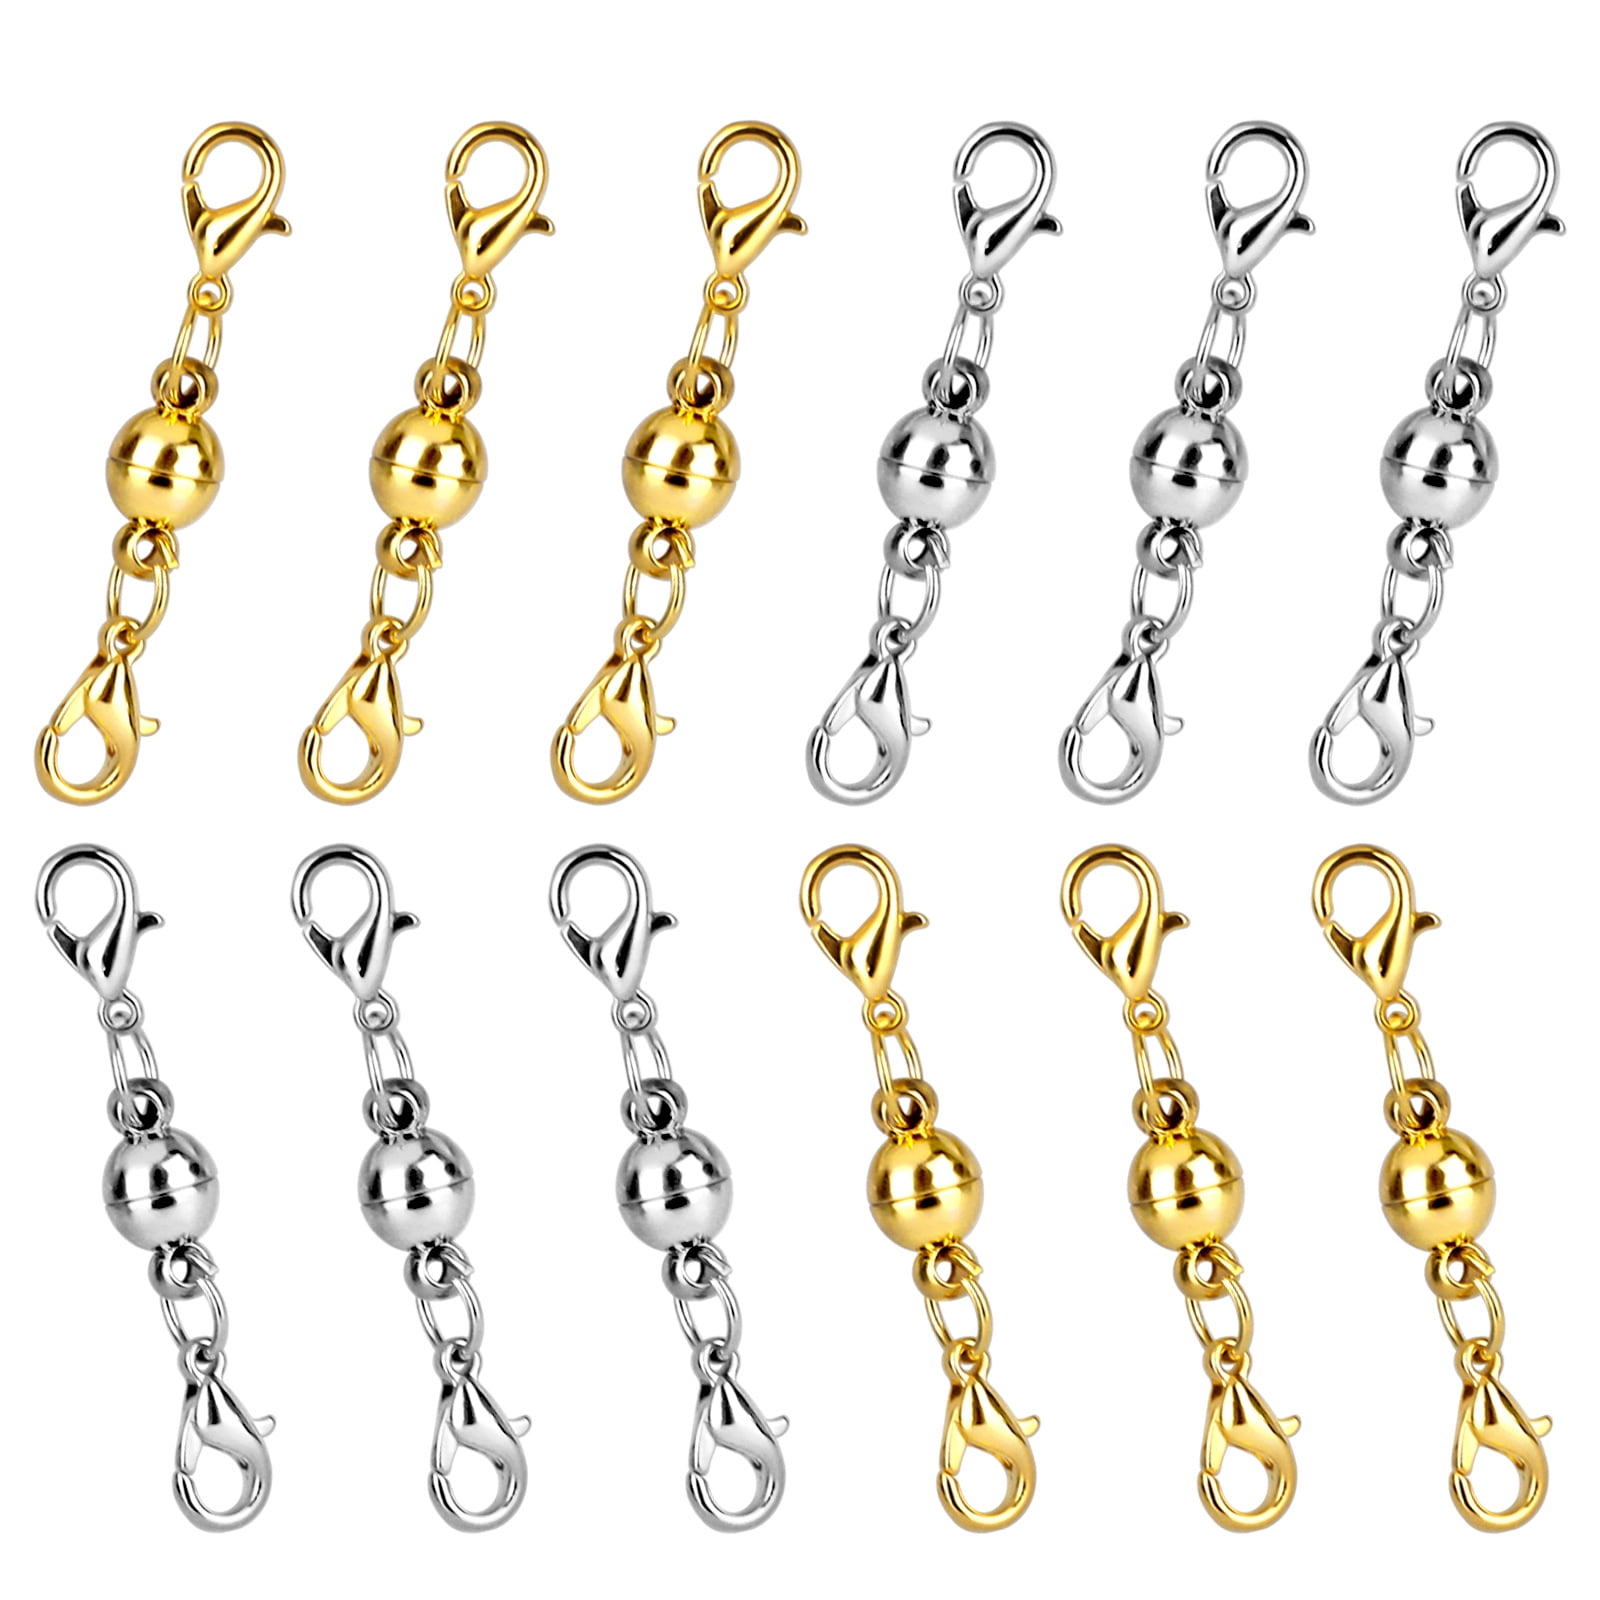 Gold 6mm Extra Strength Magnetic Clasp Jewelry Converters for Necklaces 